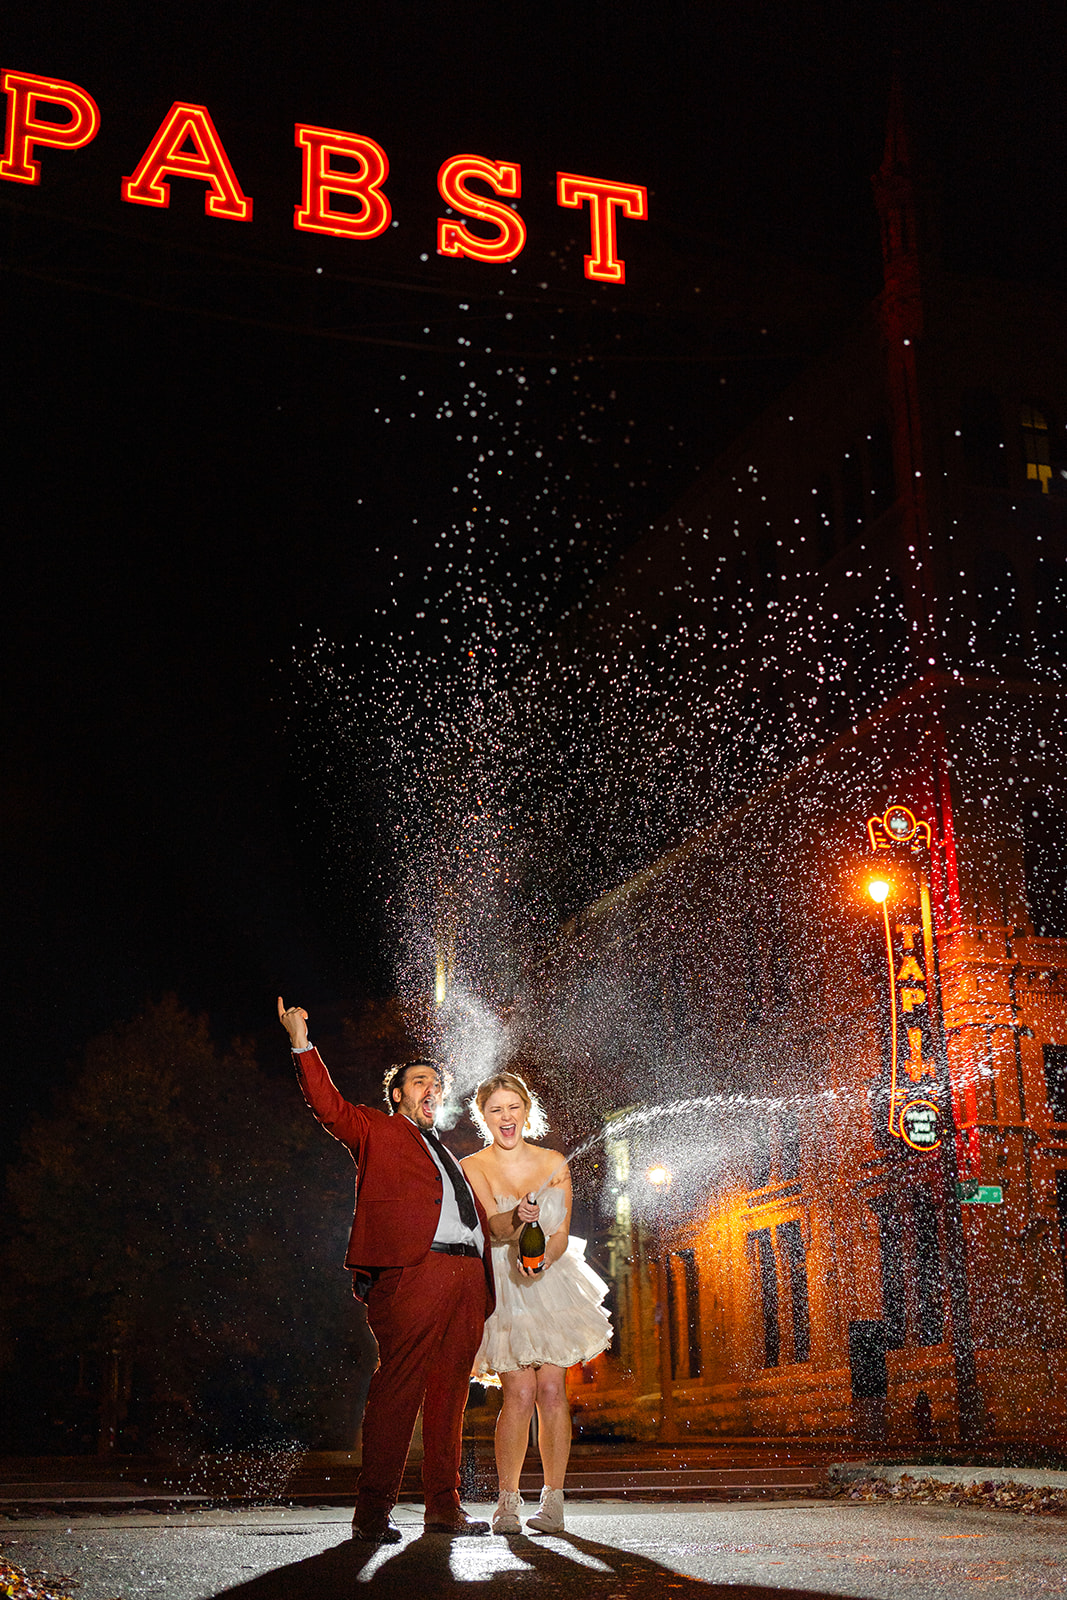 Bride and groom pop champagne bottle outside of The Best Place at the Historic Pabst Brewery